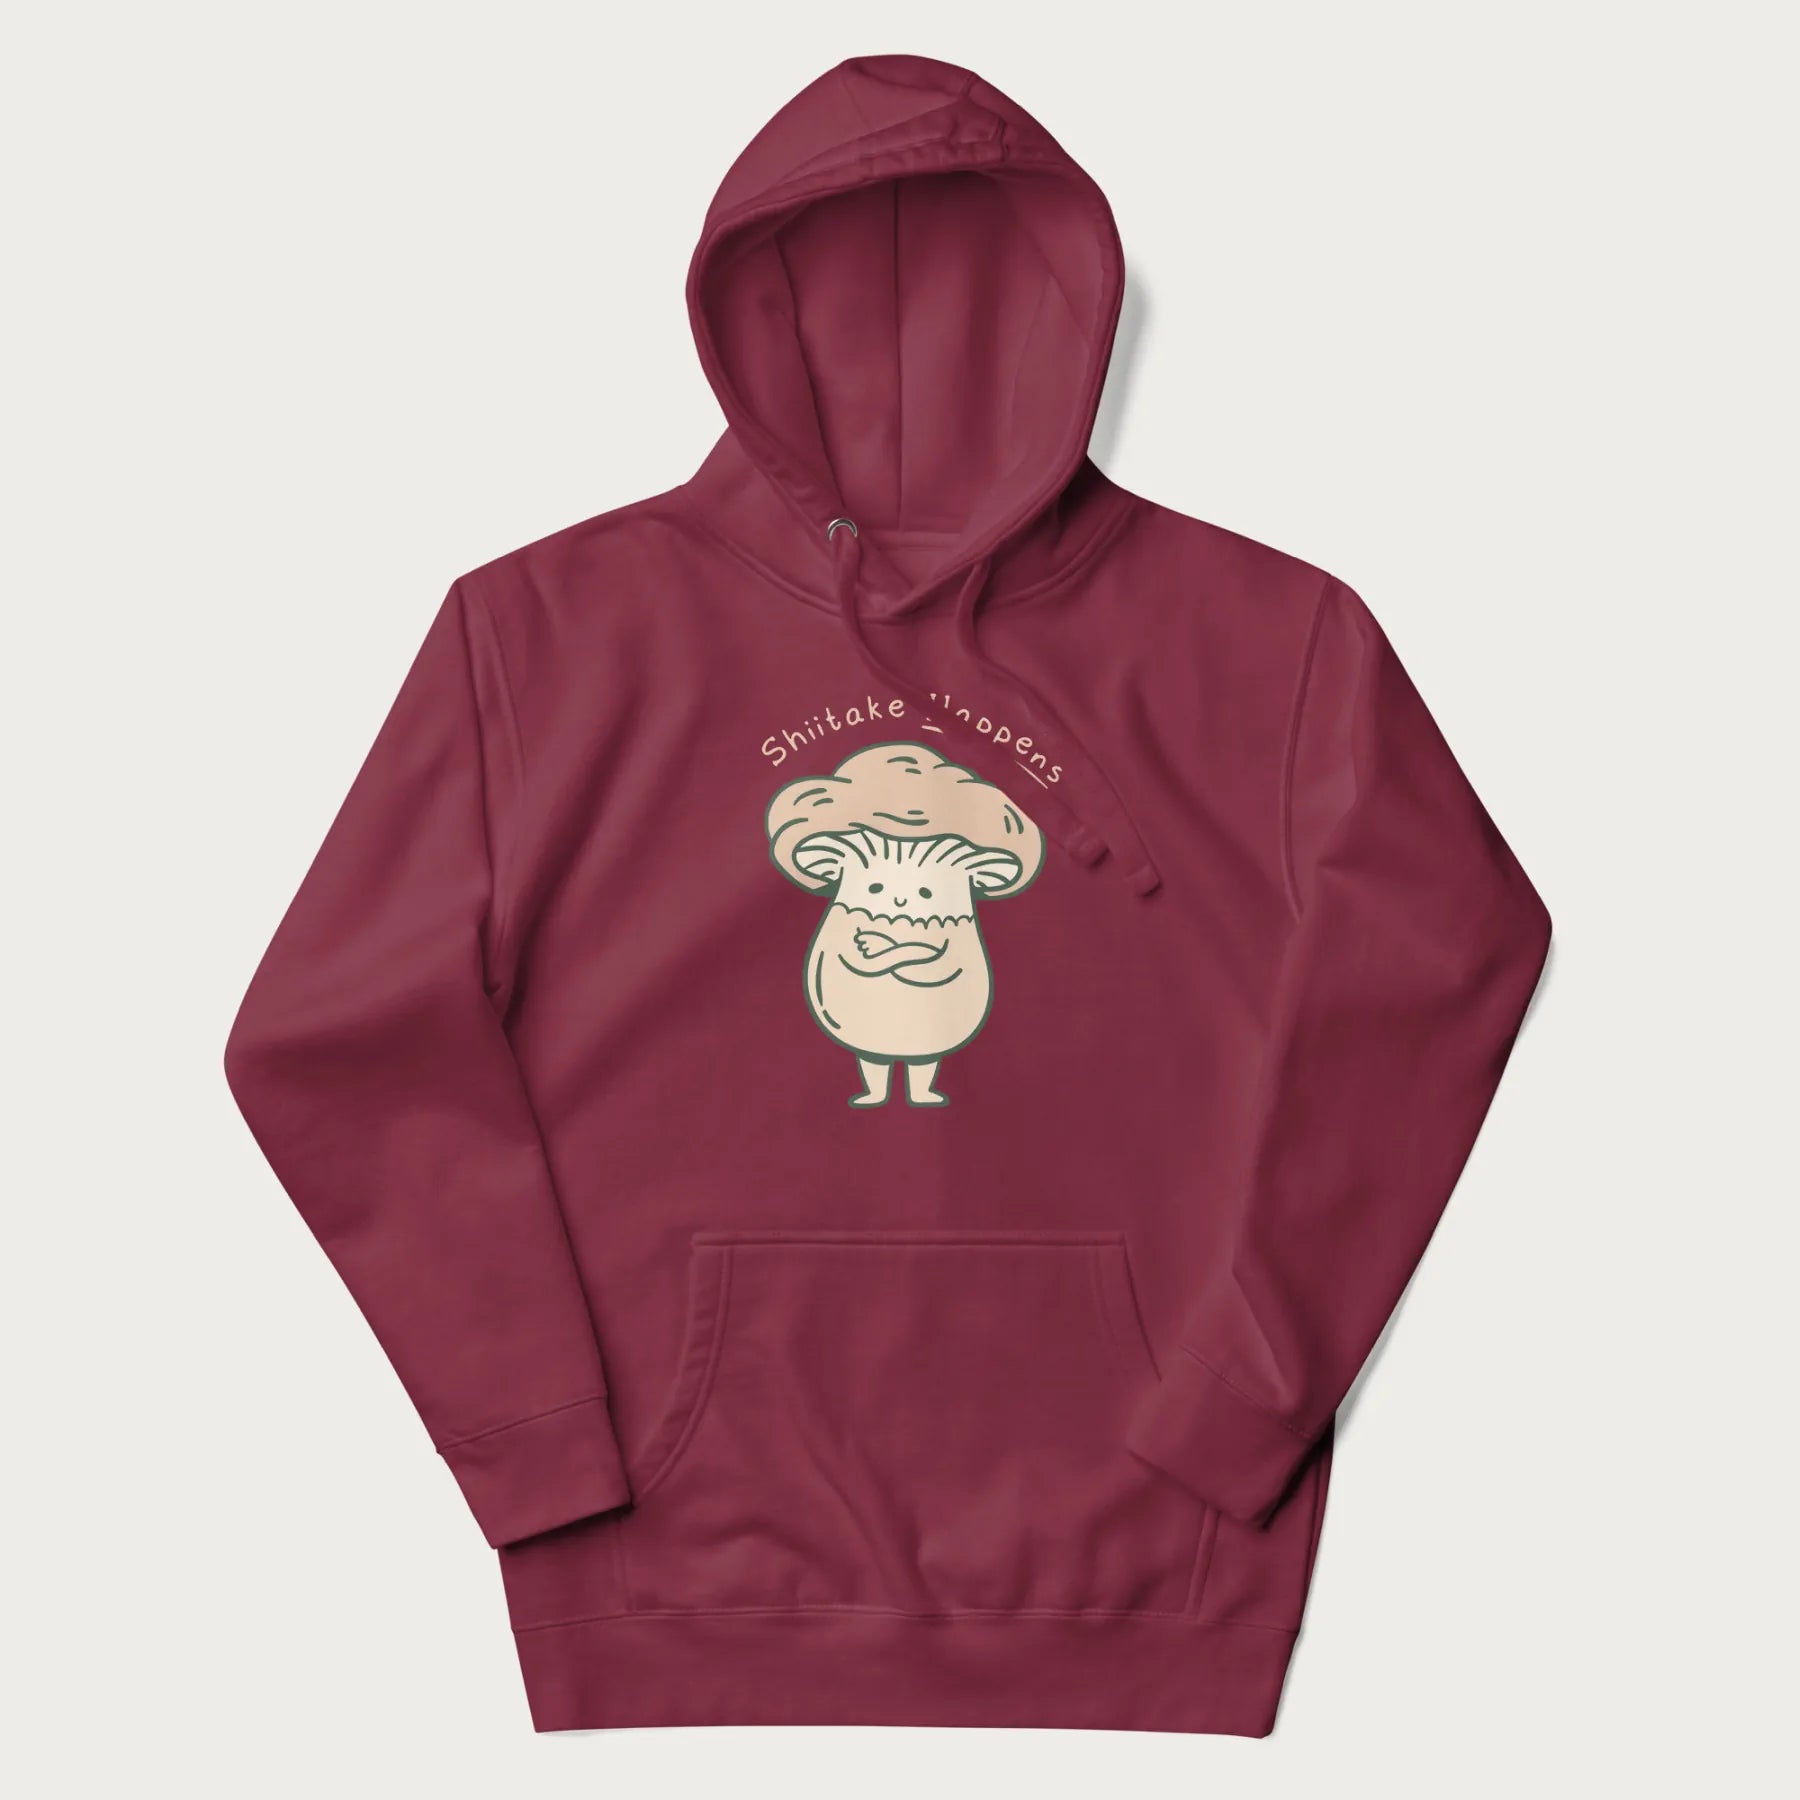 Maroon hoodie with a graphic of an adorable mushroom character and the text 'Shiitake Happens'.